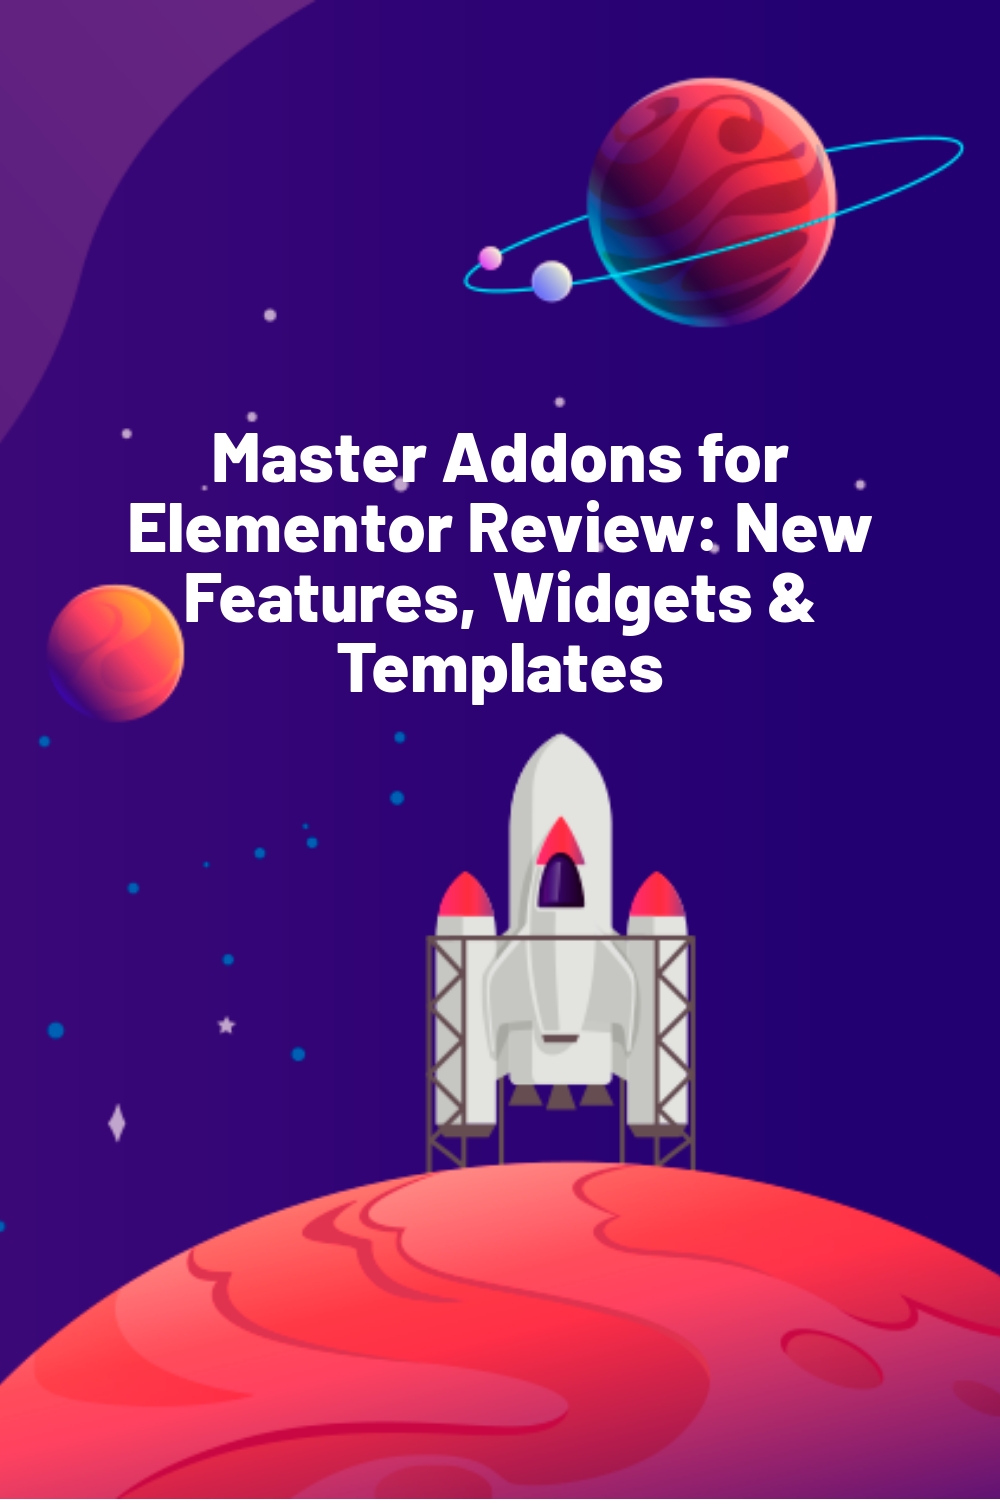 Master Addons for Elementor Review: New Features, Widgets & Templates